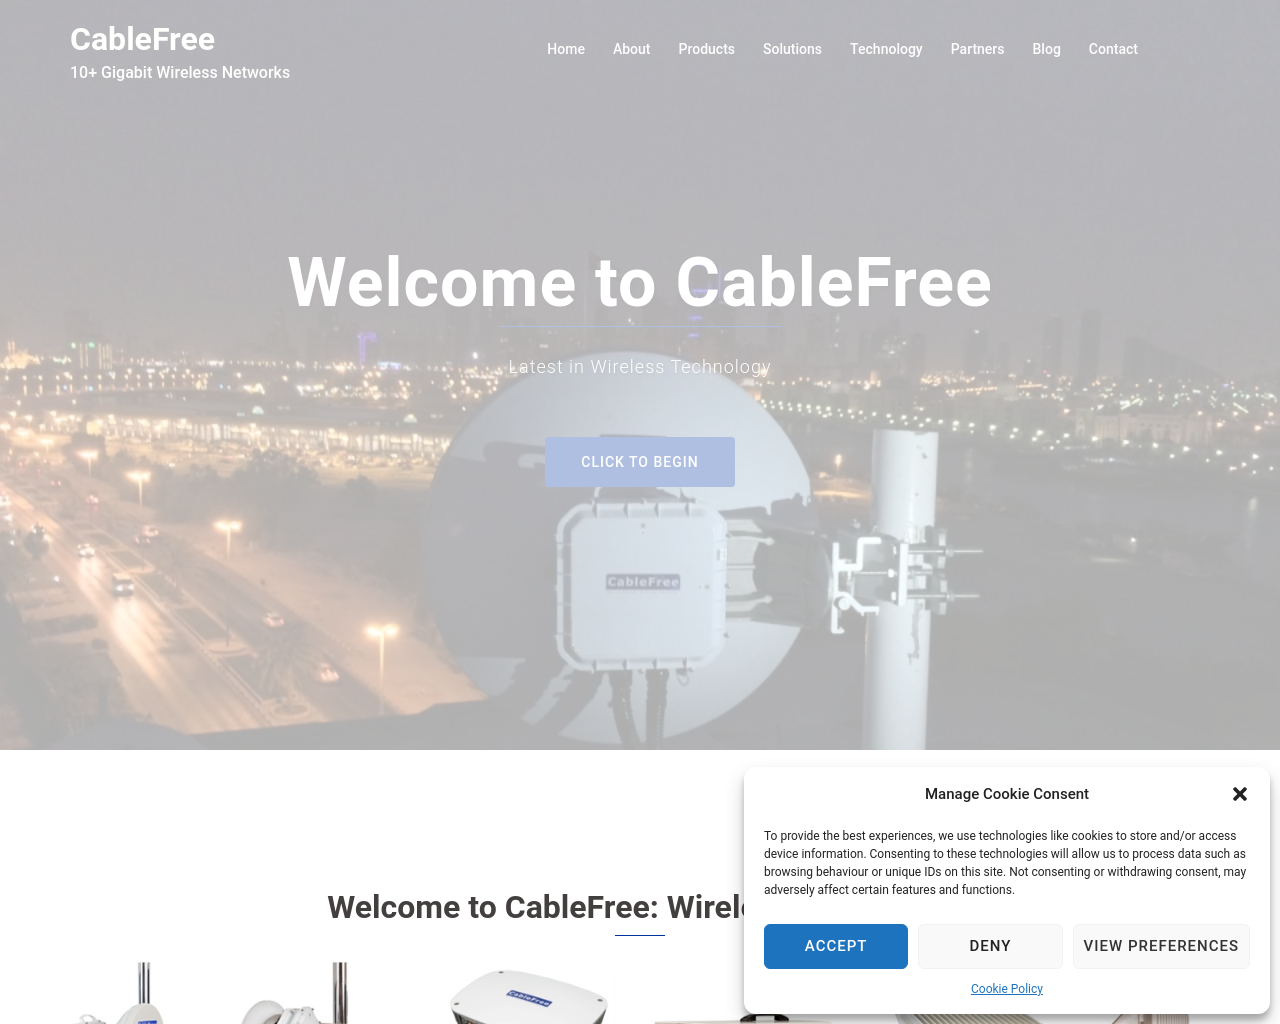 cablefree.net